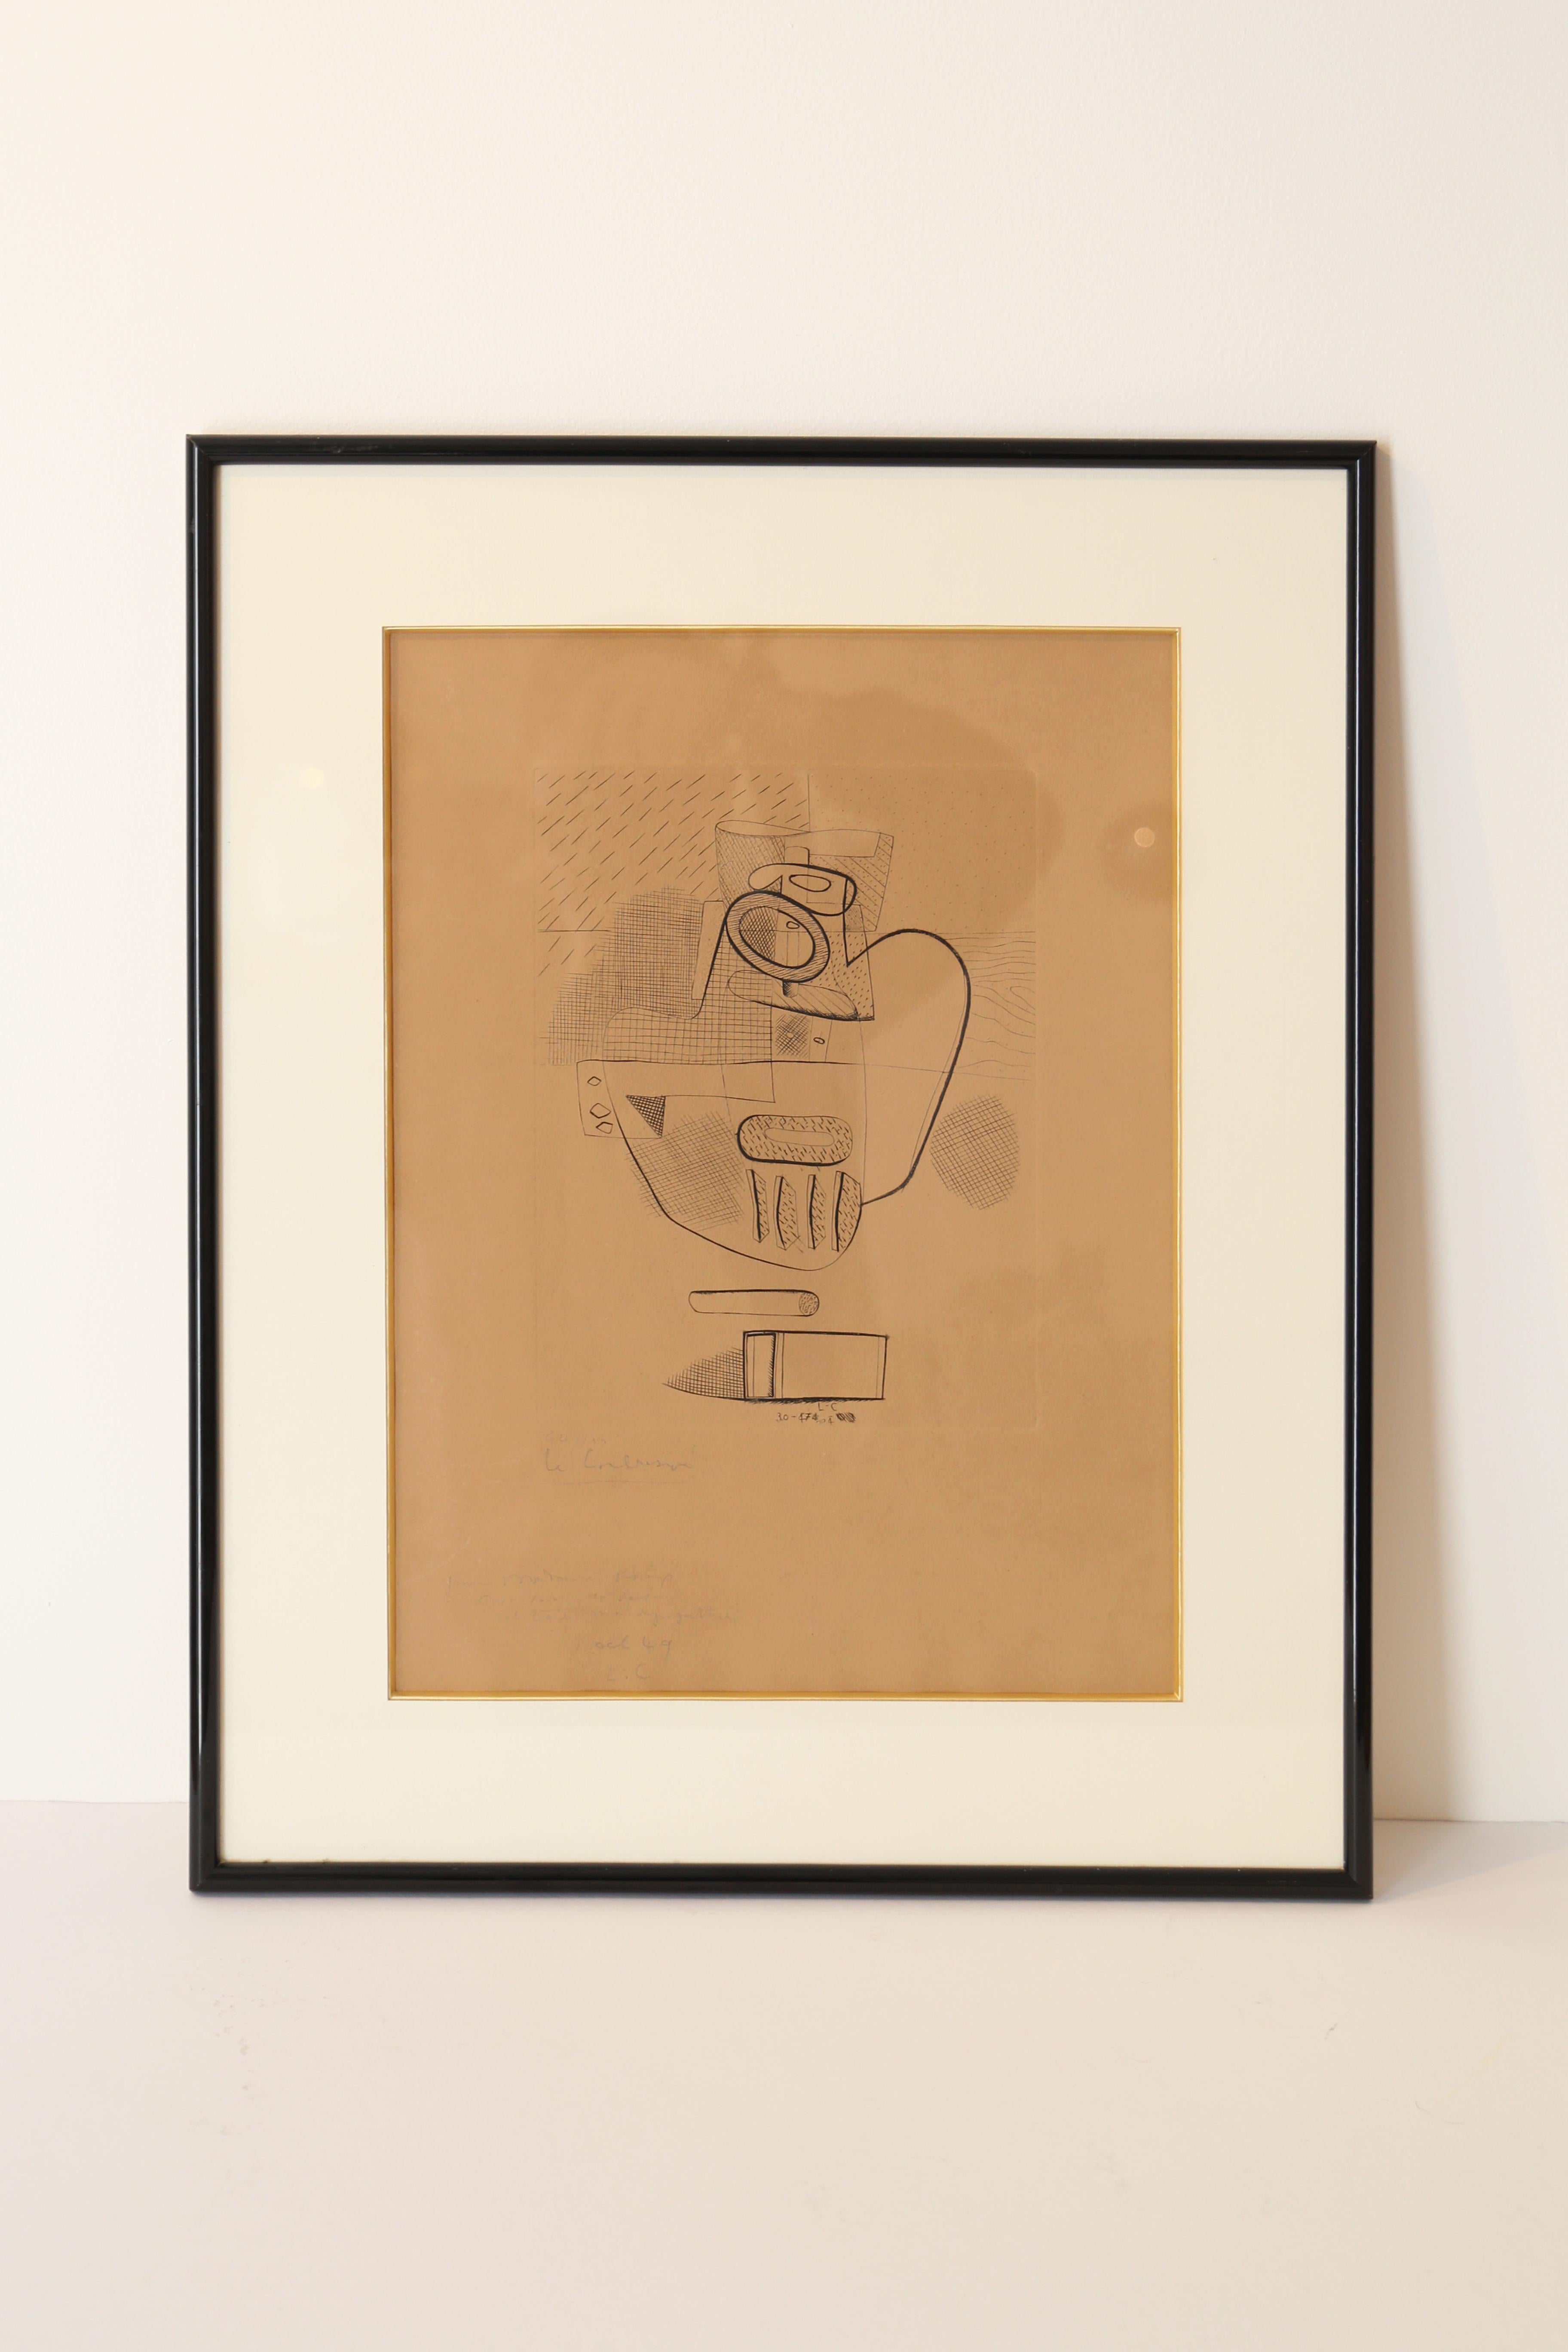 Etched 'Nature Morte' engraving by Le Corbusier